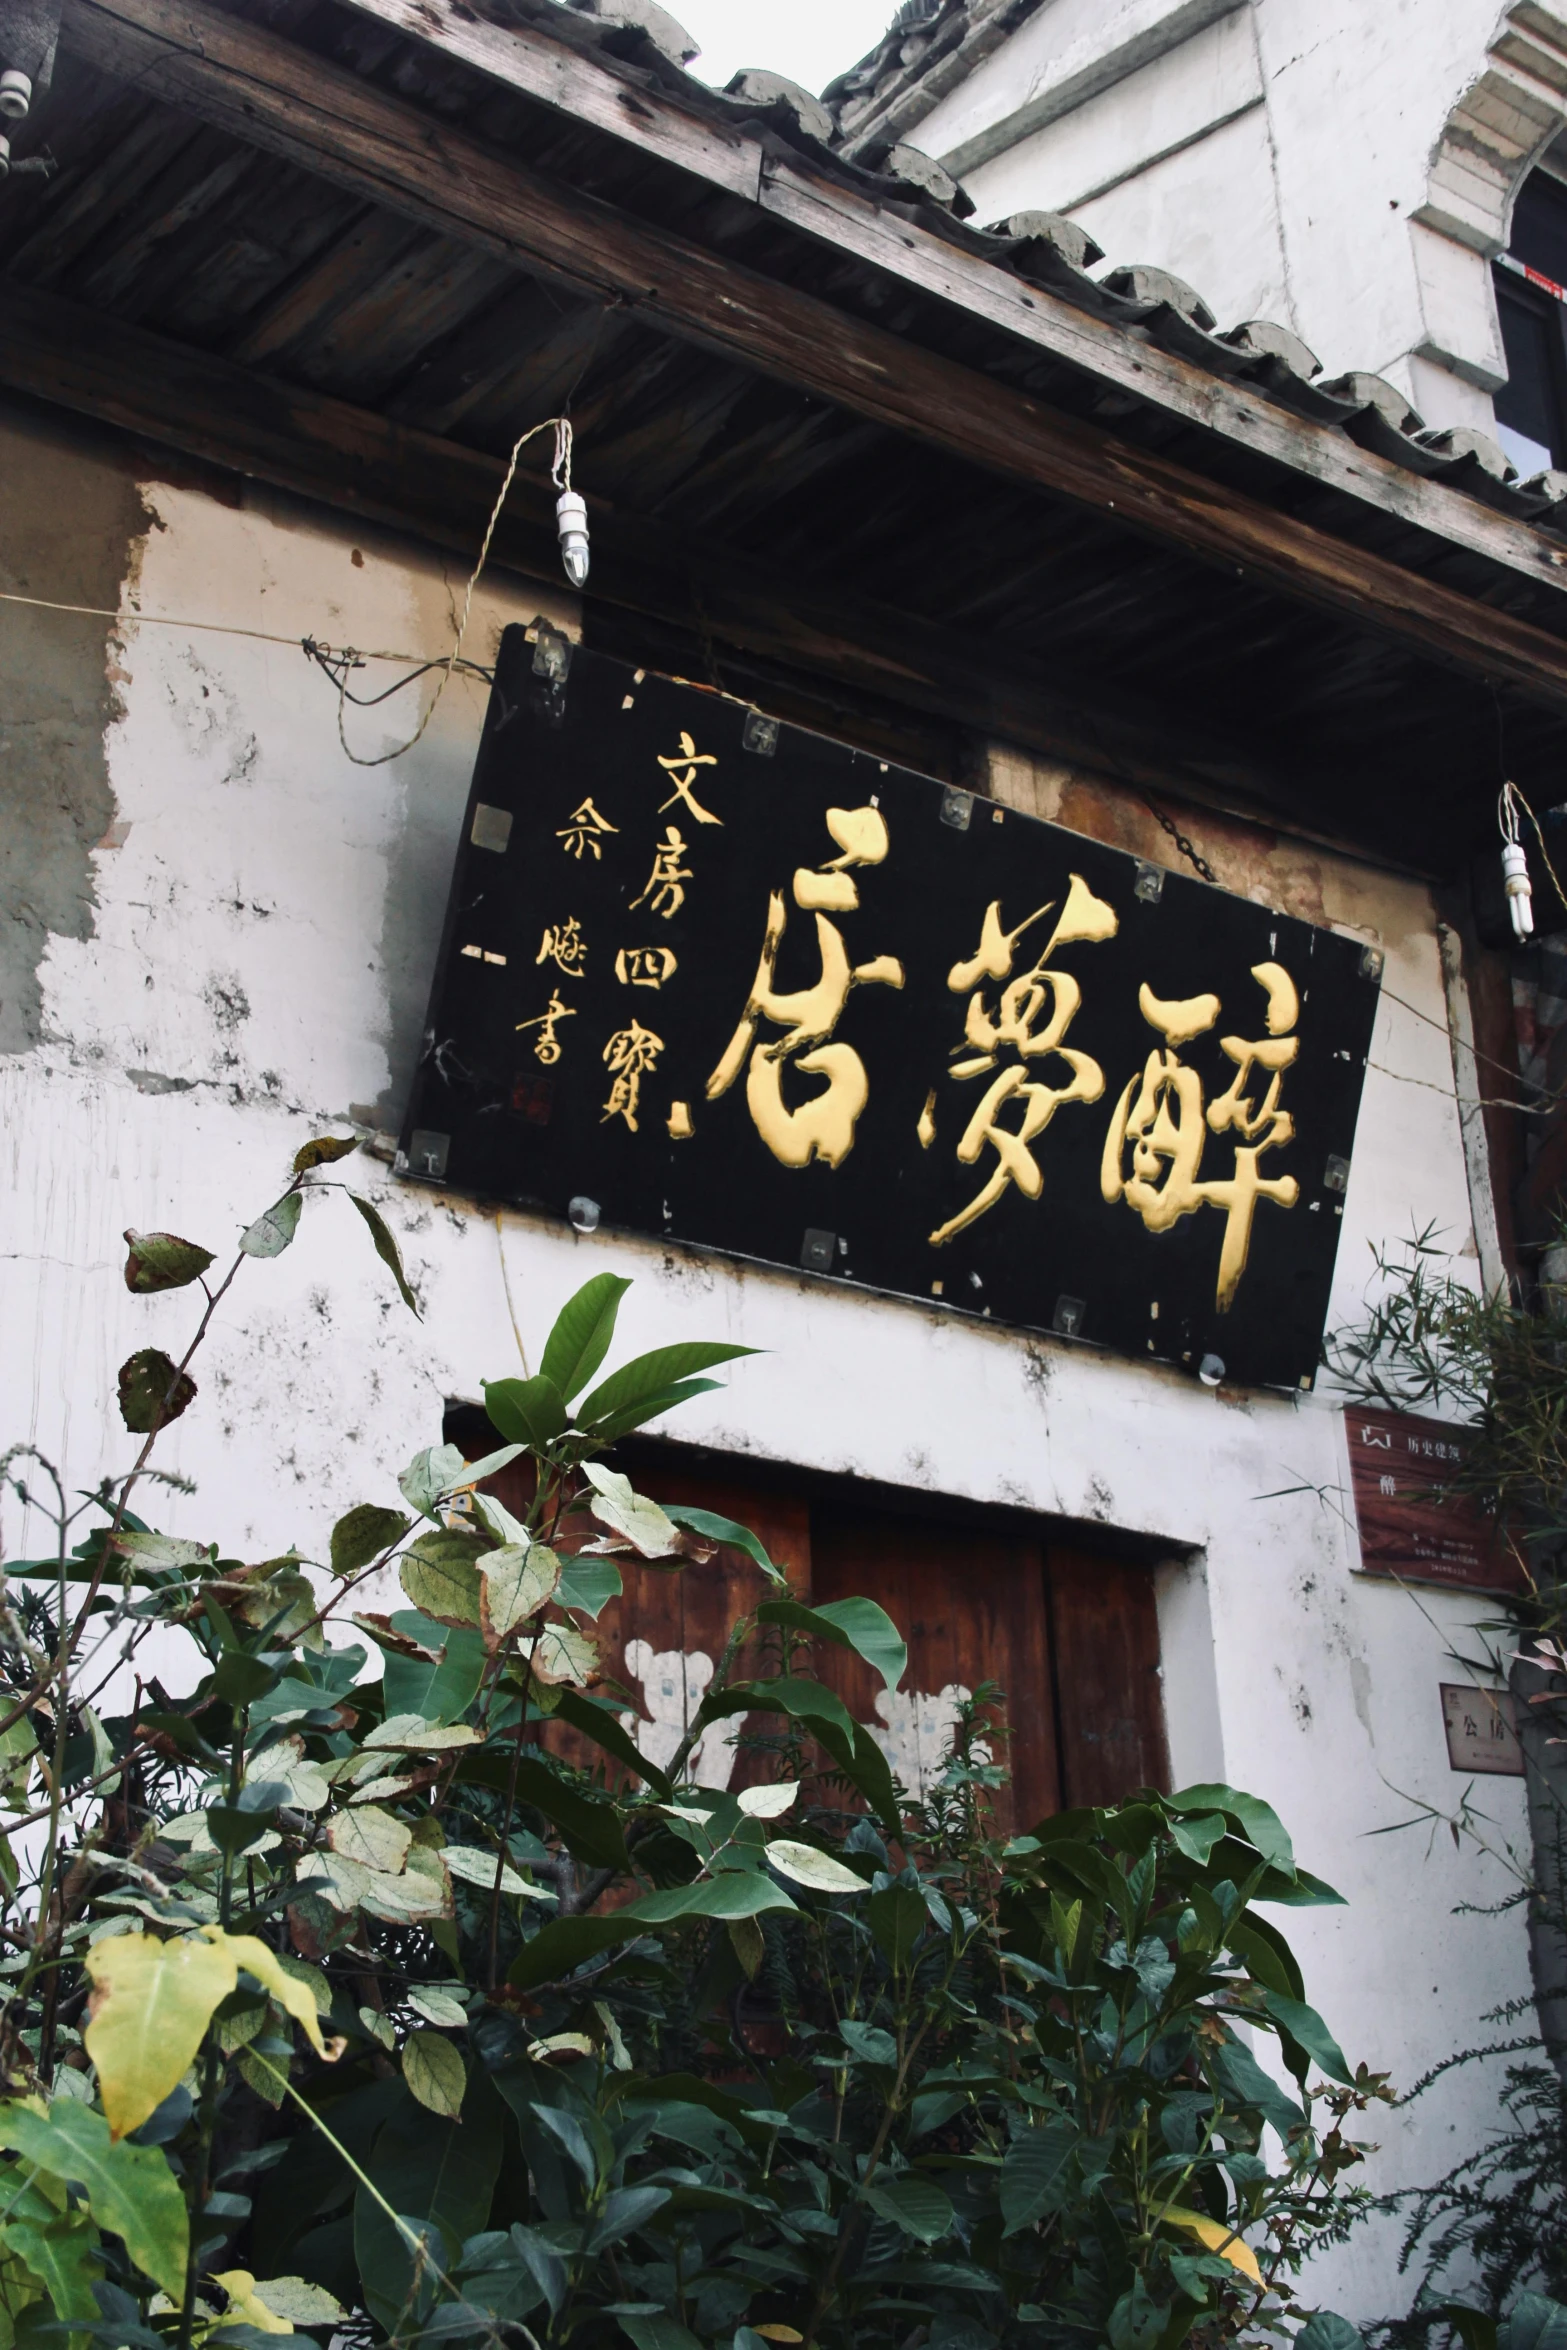 oriental writing is displayed on the side of a building